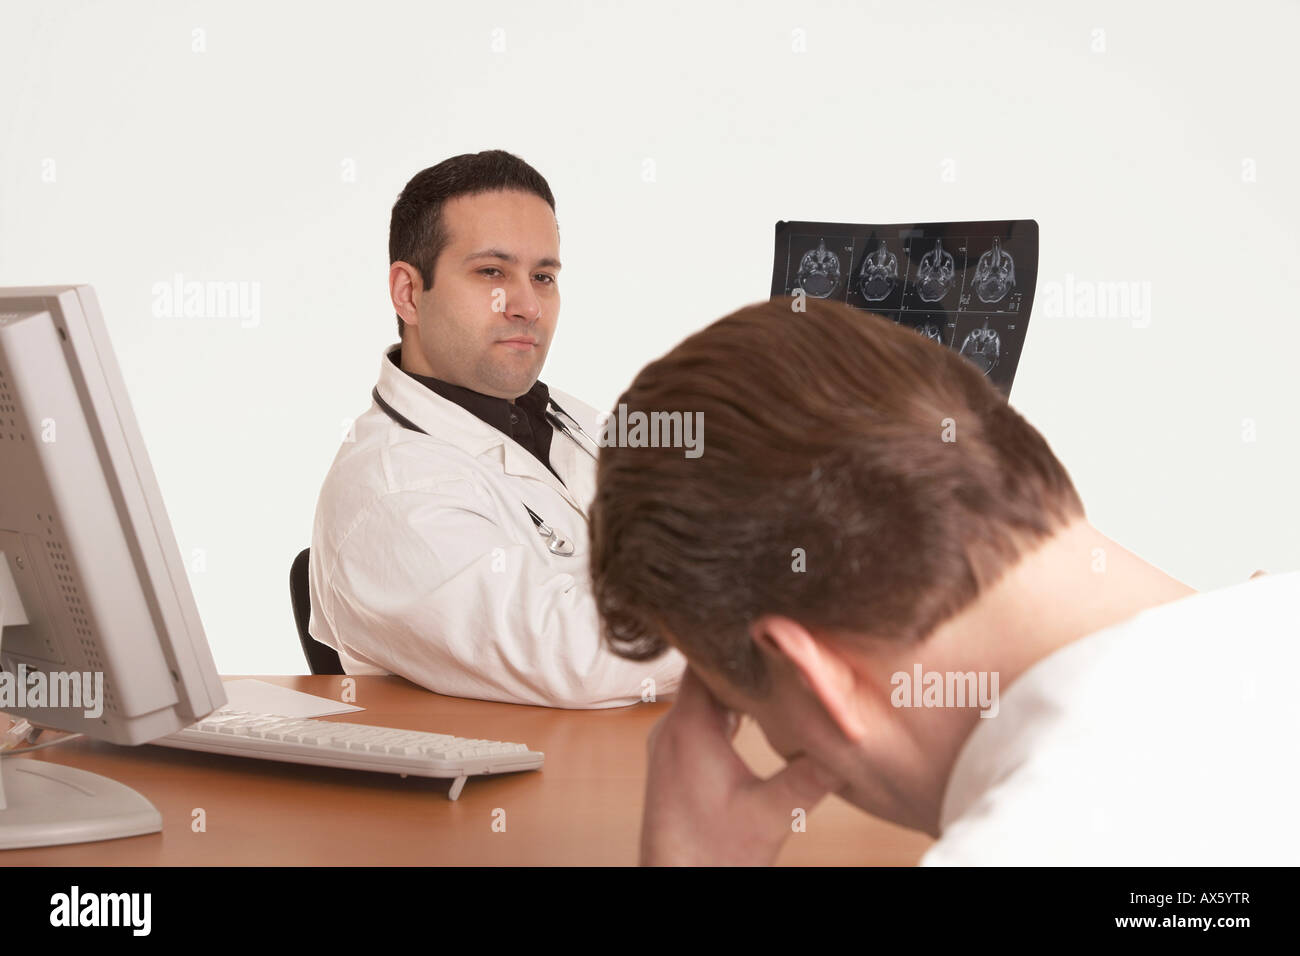 Physician with stethoscope showing CT scan image, delivering diagnosis to patient Stock Photo